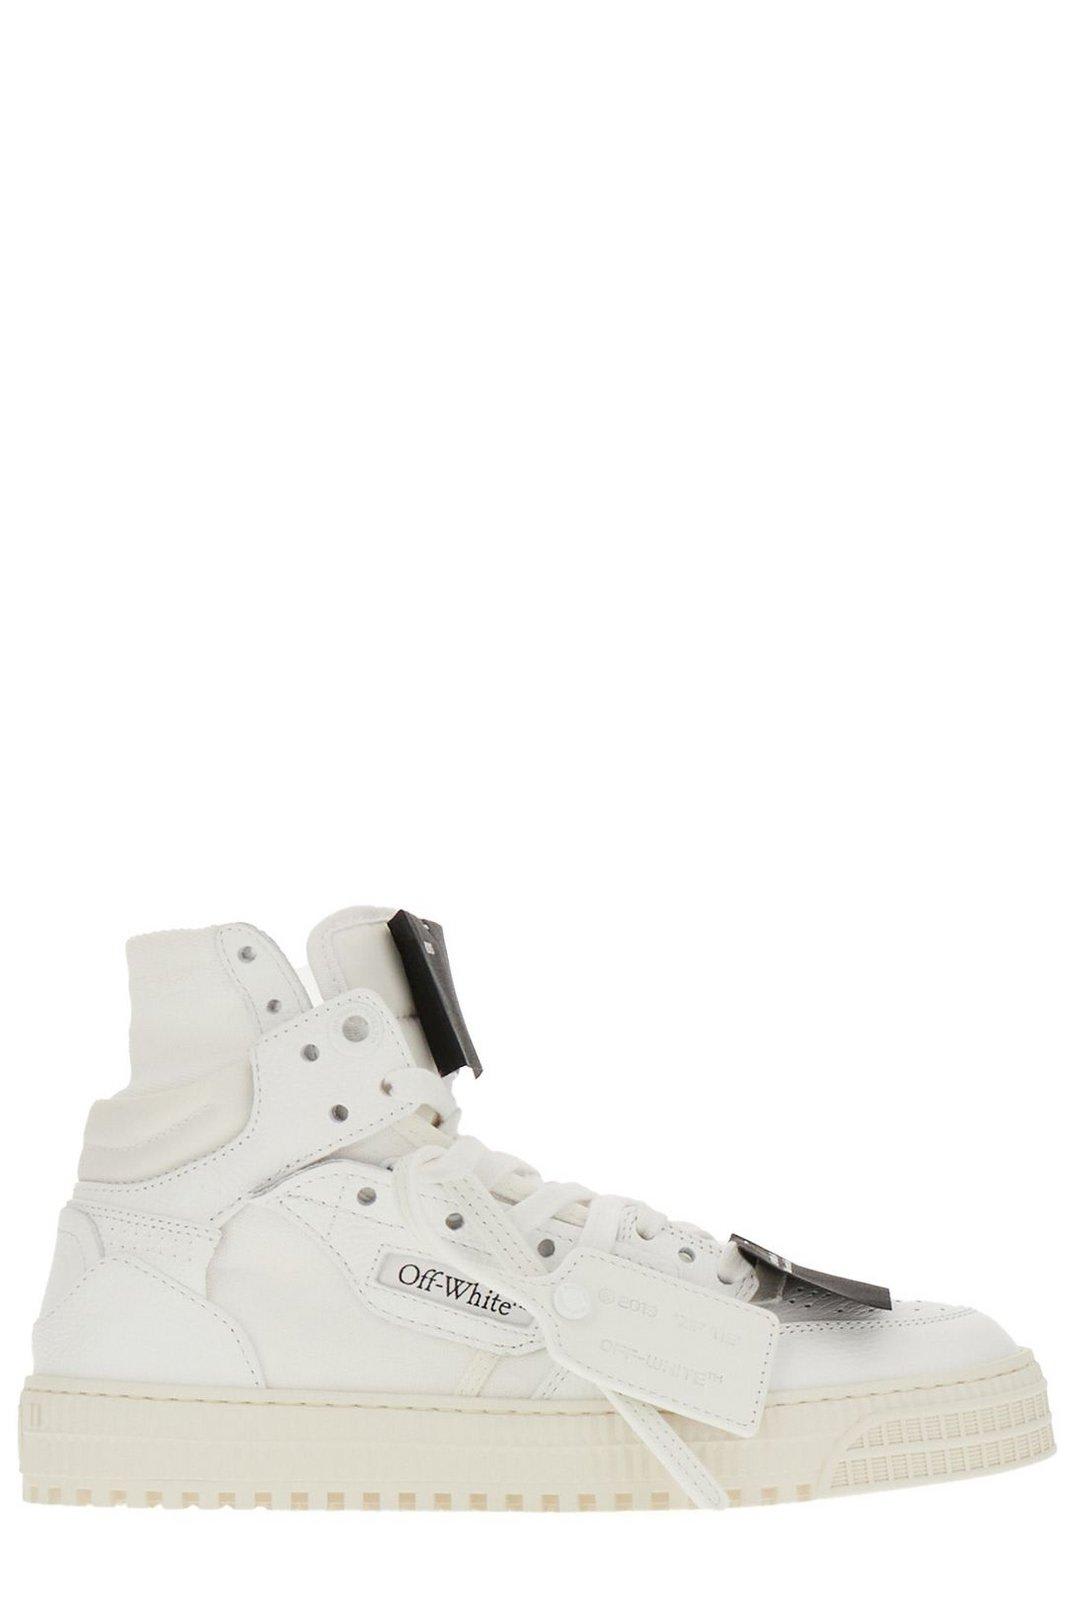 Off-White 3.0 Off Court Leather High-top Sneakers